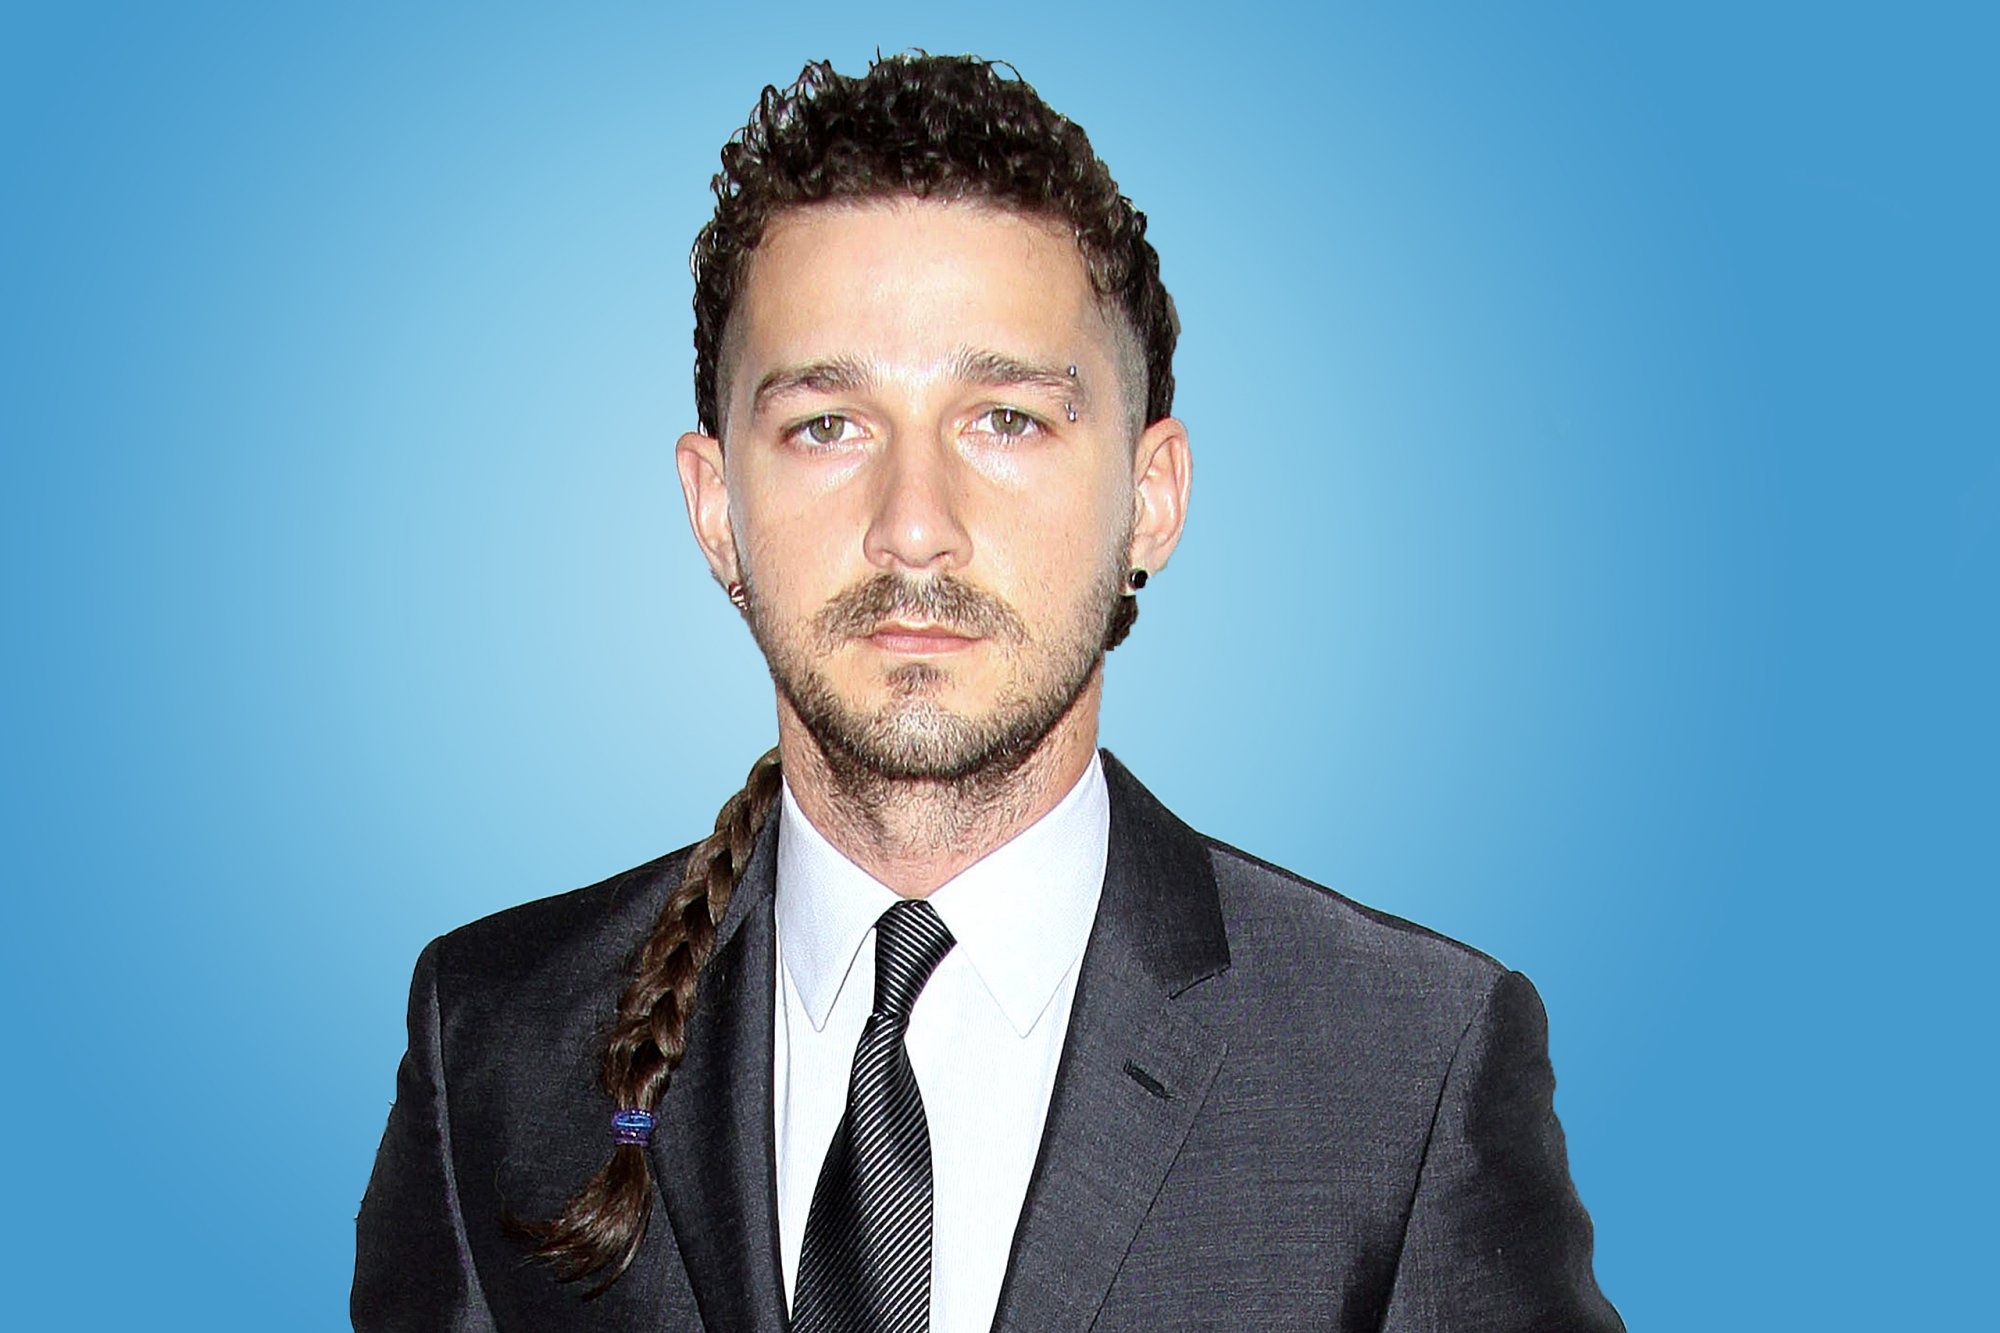 Shia LaBeouf, Celebrity wallpapers, HQ pictures, 4K quality, 2000x1340 HD Desktop